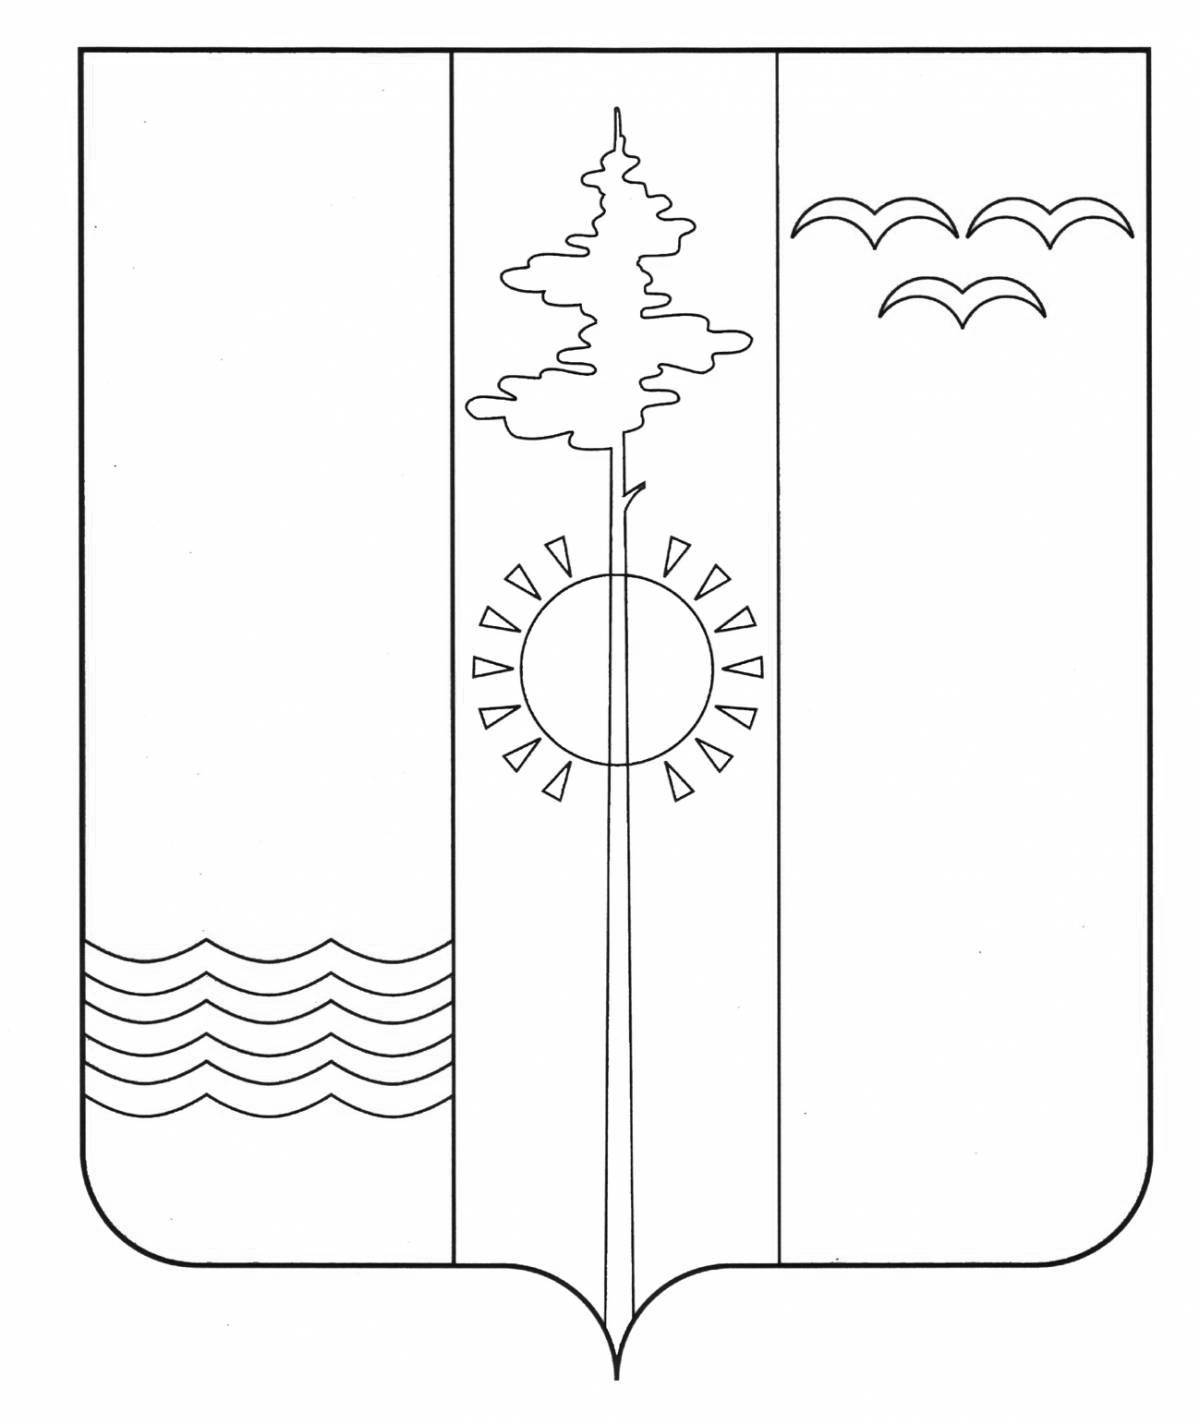 Dazzling coat of arms of the Kirov region